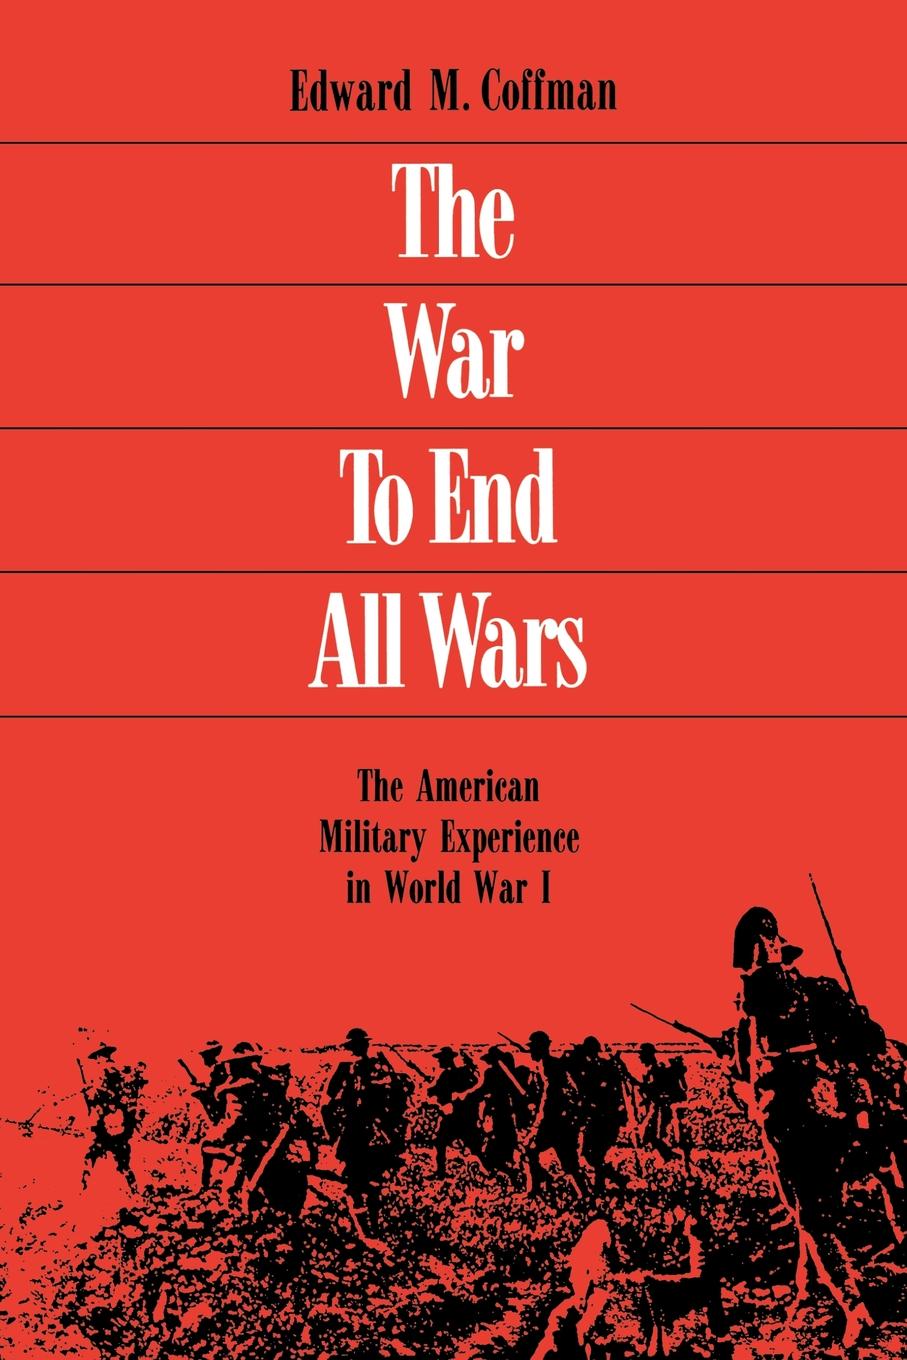 The War to End All Wars - Edward M. Coffman